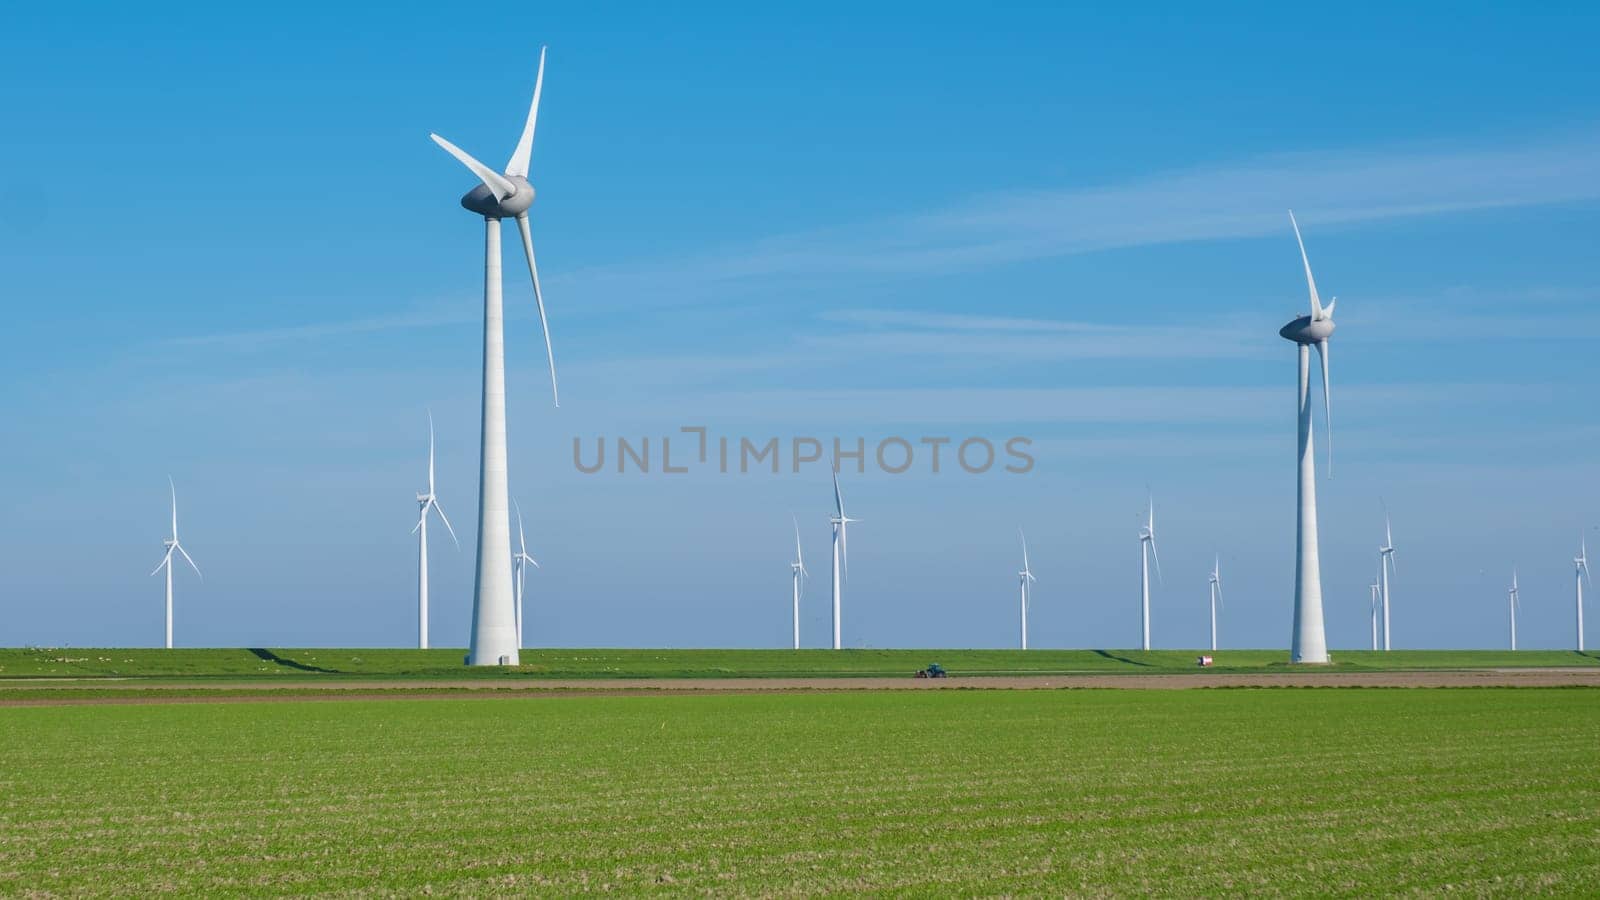 A vast field of lush green grass stretches out in the foreground, while a group of towering windmills spin gracefully in the distance against the clear sky of Flevoland, Netherlands.